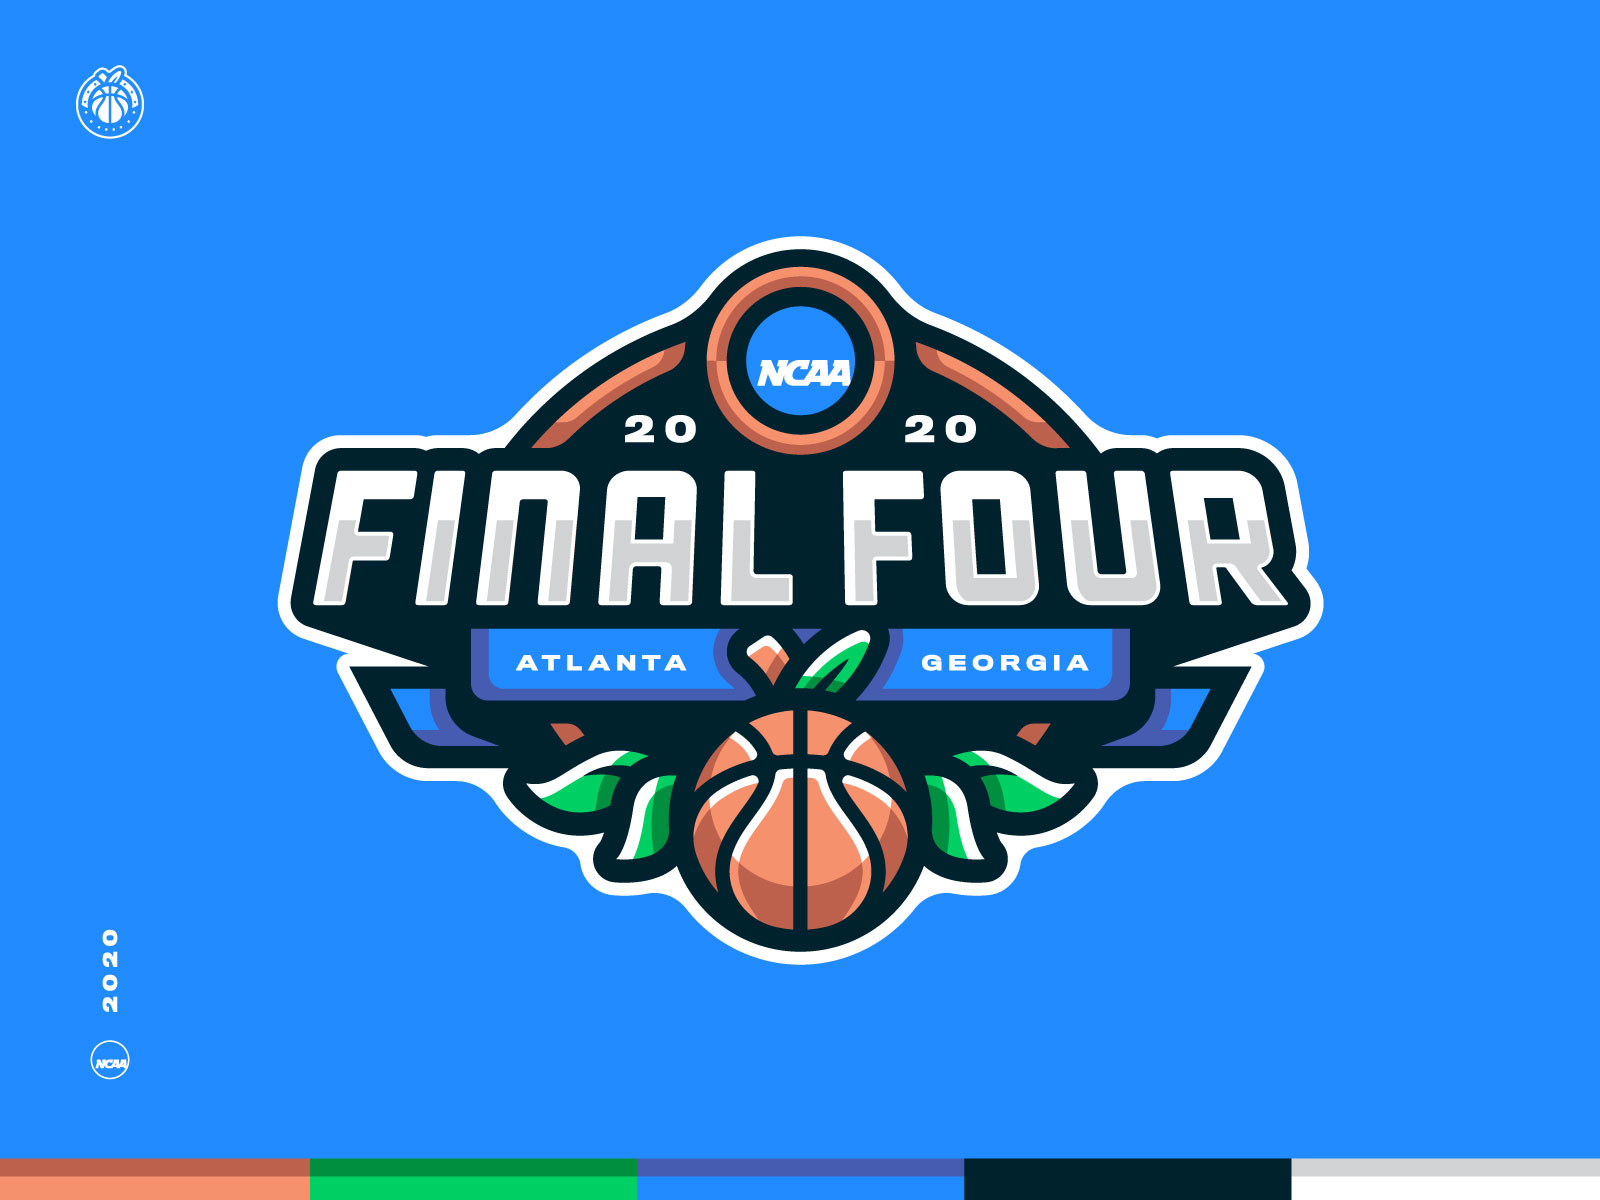 2020 Final Four Branding Concept by Grant O'Dell on Dribbble